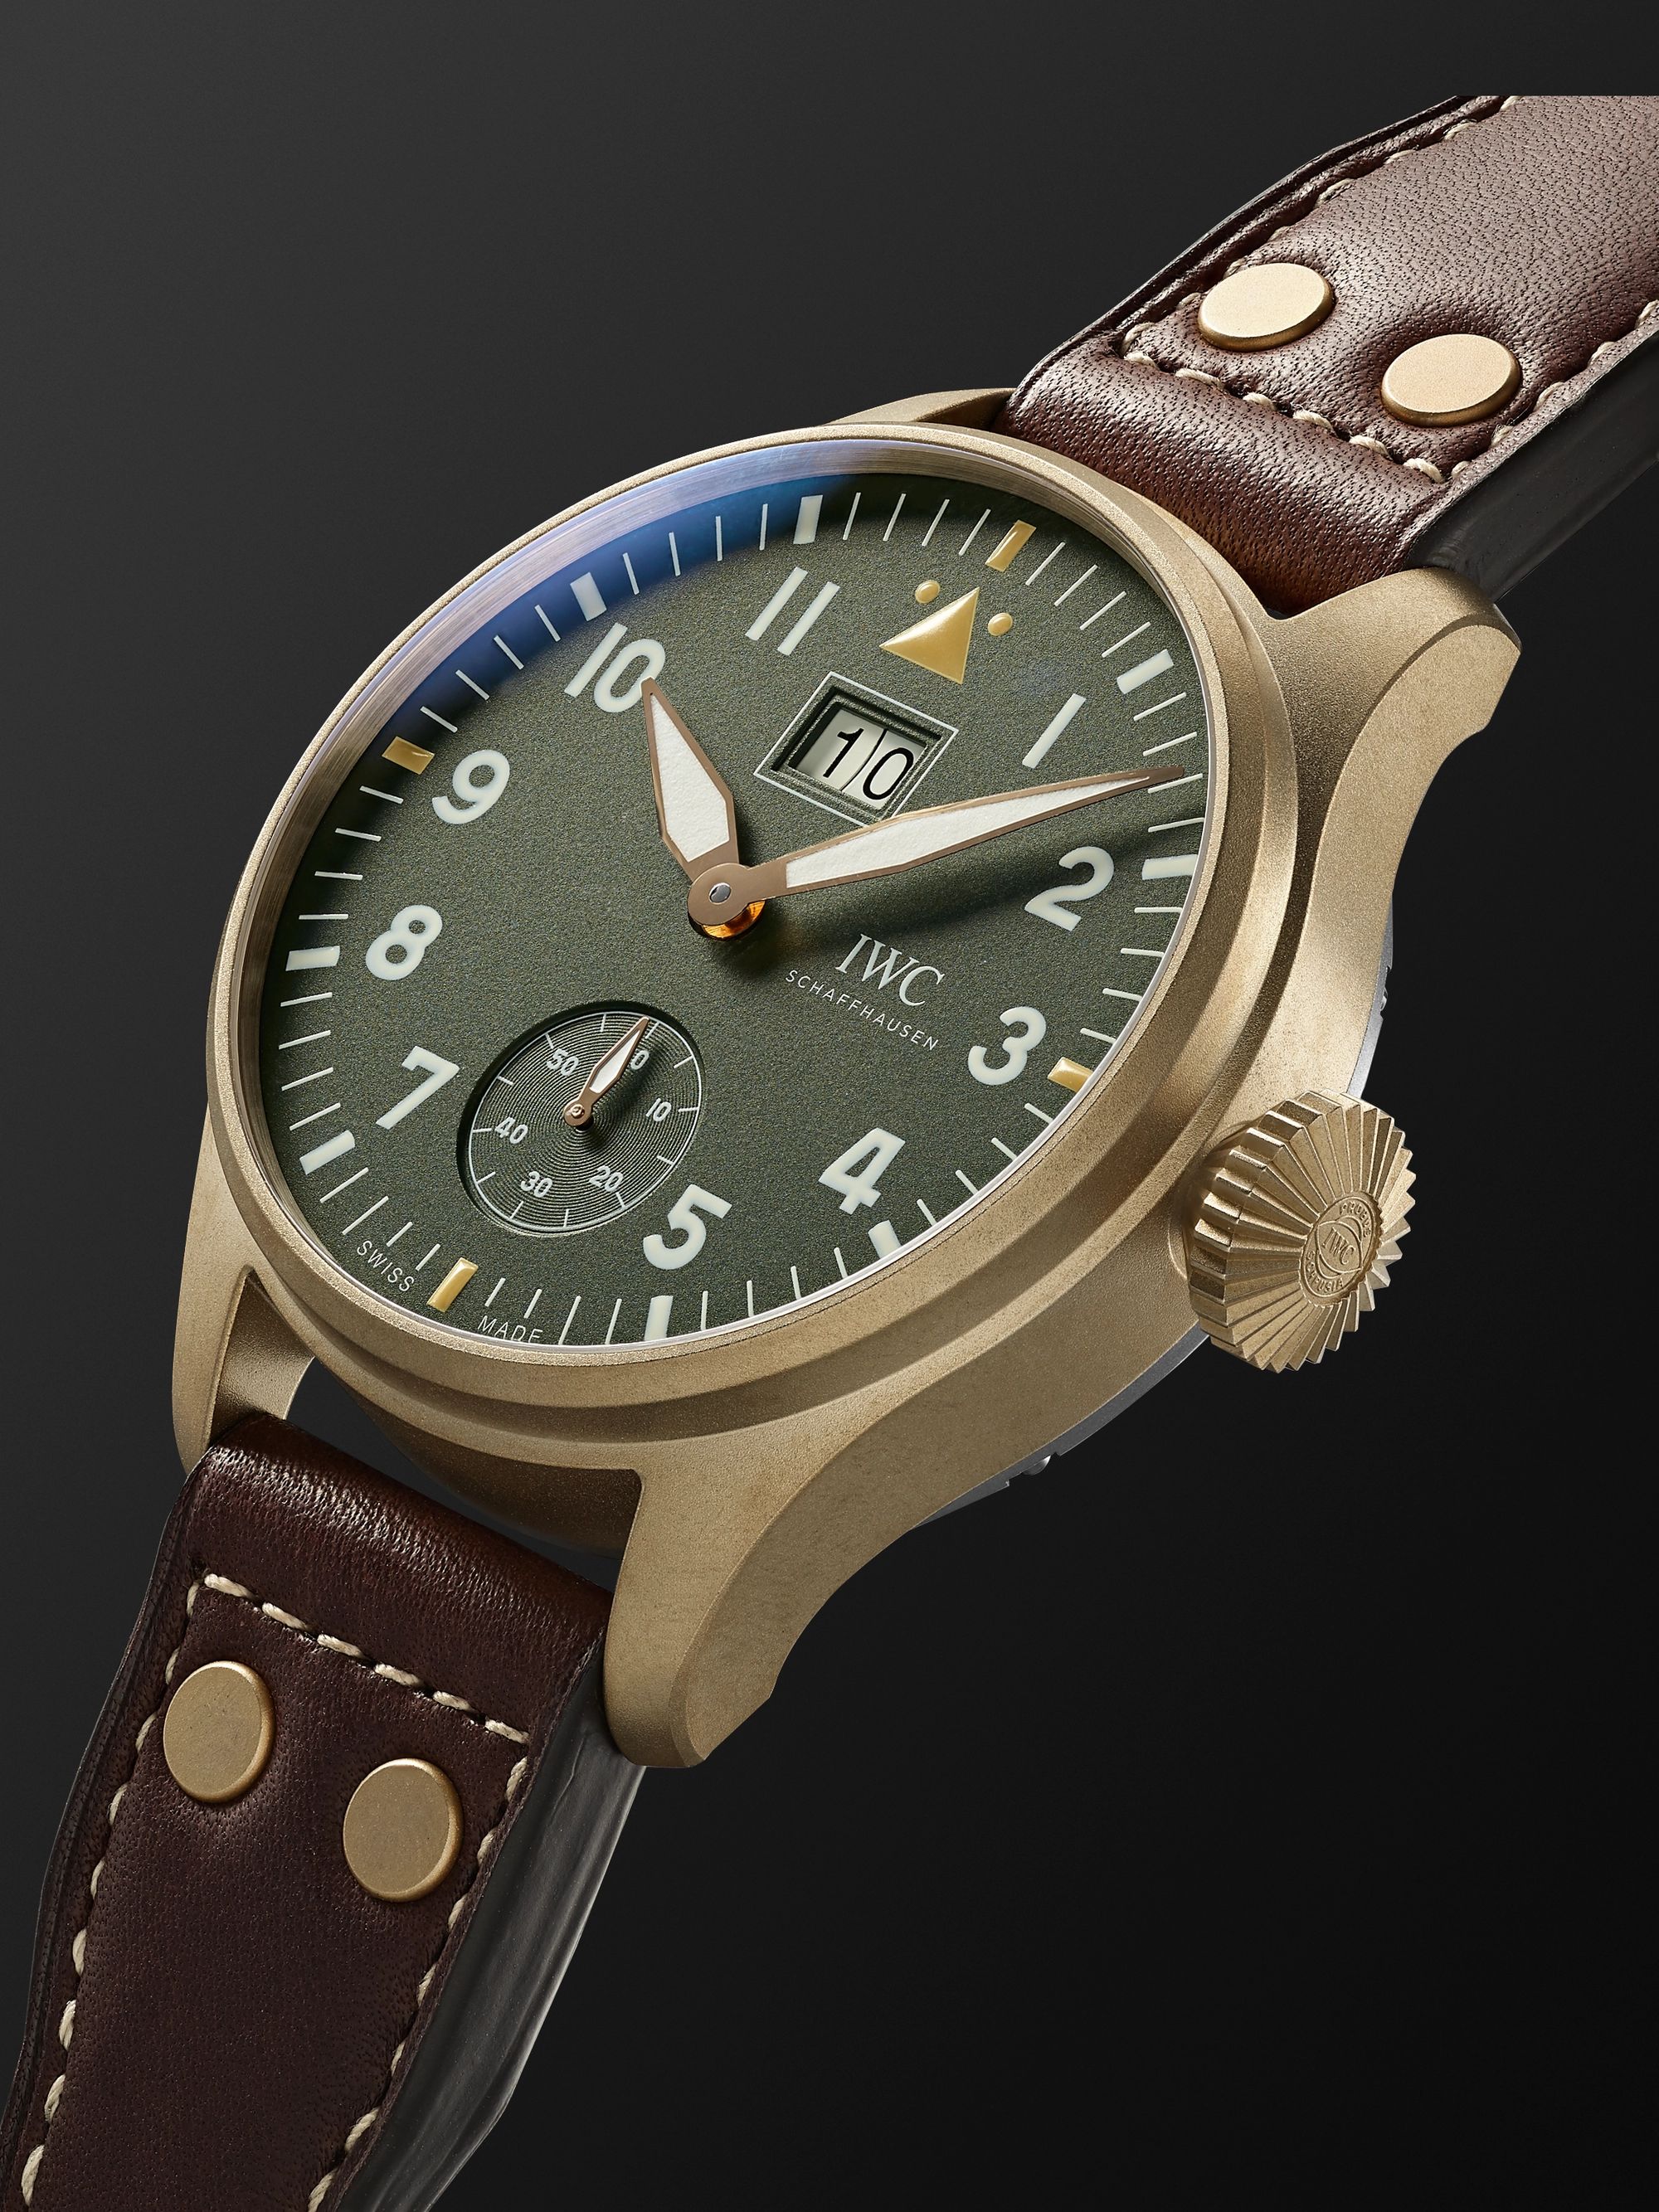 IWC SCHAFFHAUSEN Big Pilot's Big Date Spitfire ‘Mission Accomplished’ Limited Edition Hand-Wound 46.2mm Bronze and Leather Watch, Ref. No. IW510506